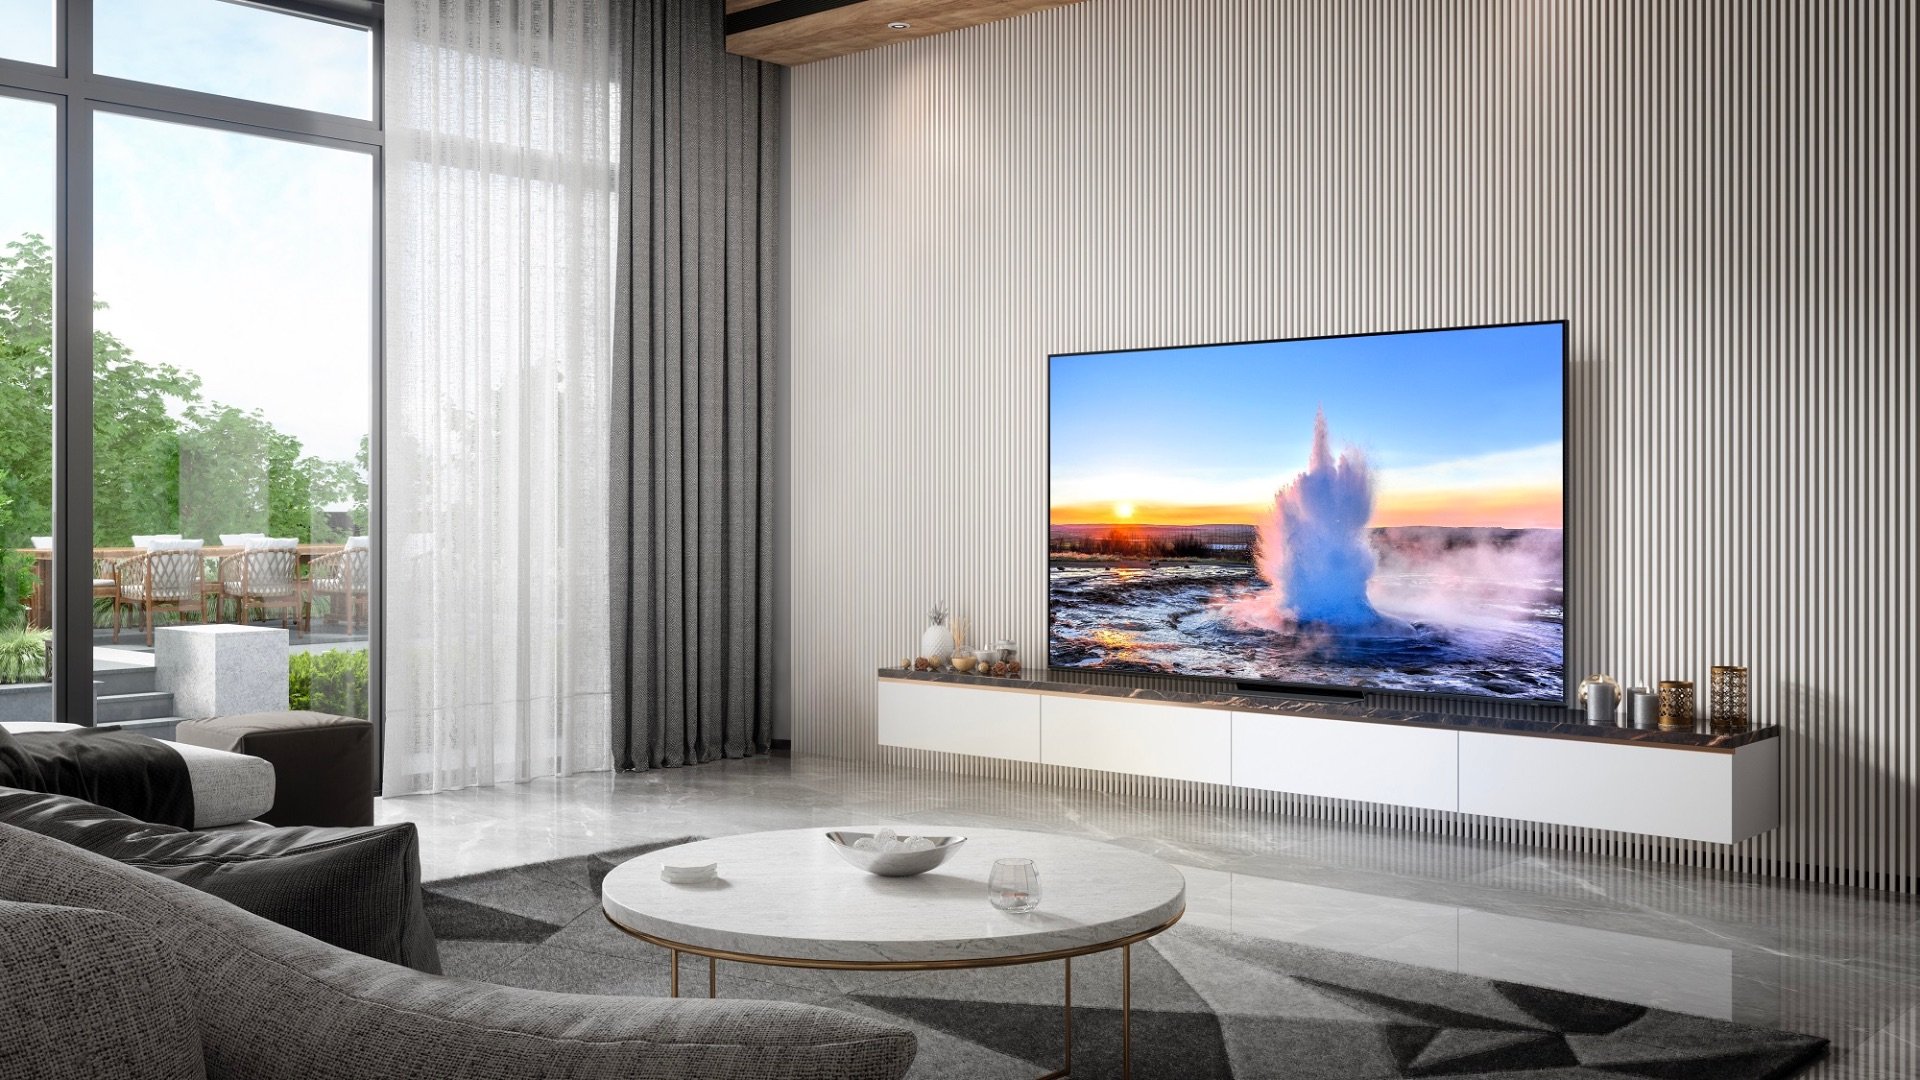 What is a QLED TV? - SamMobile